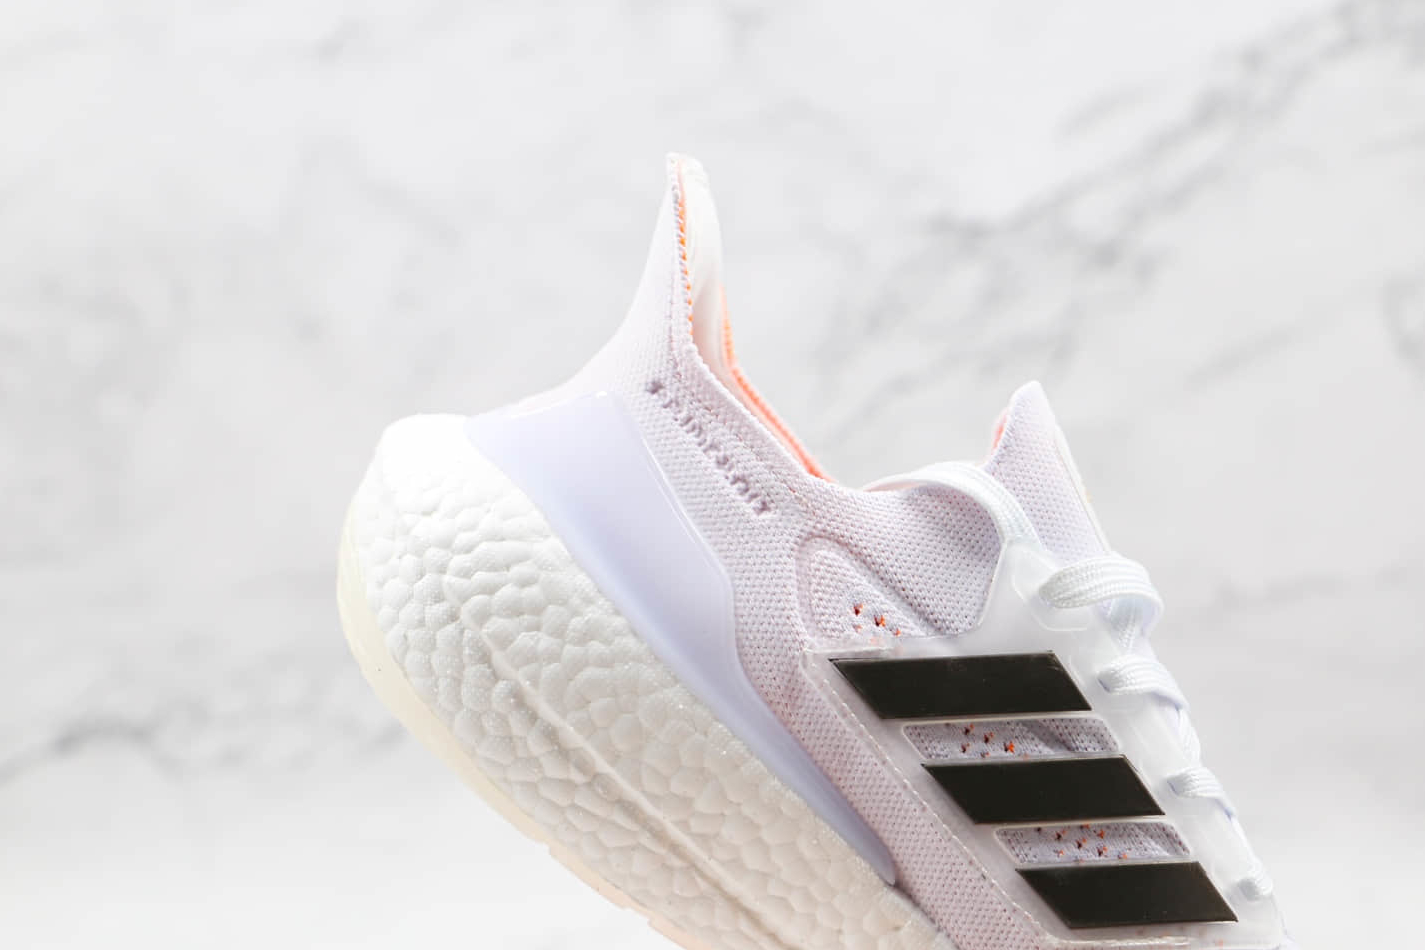 Adidas UltraBoost 21 'Tokyo' S23840 - Performance meets style with Tokyo-inspired design